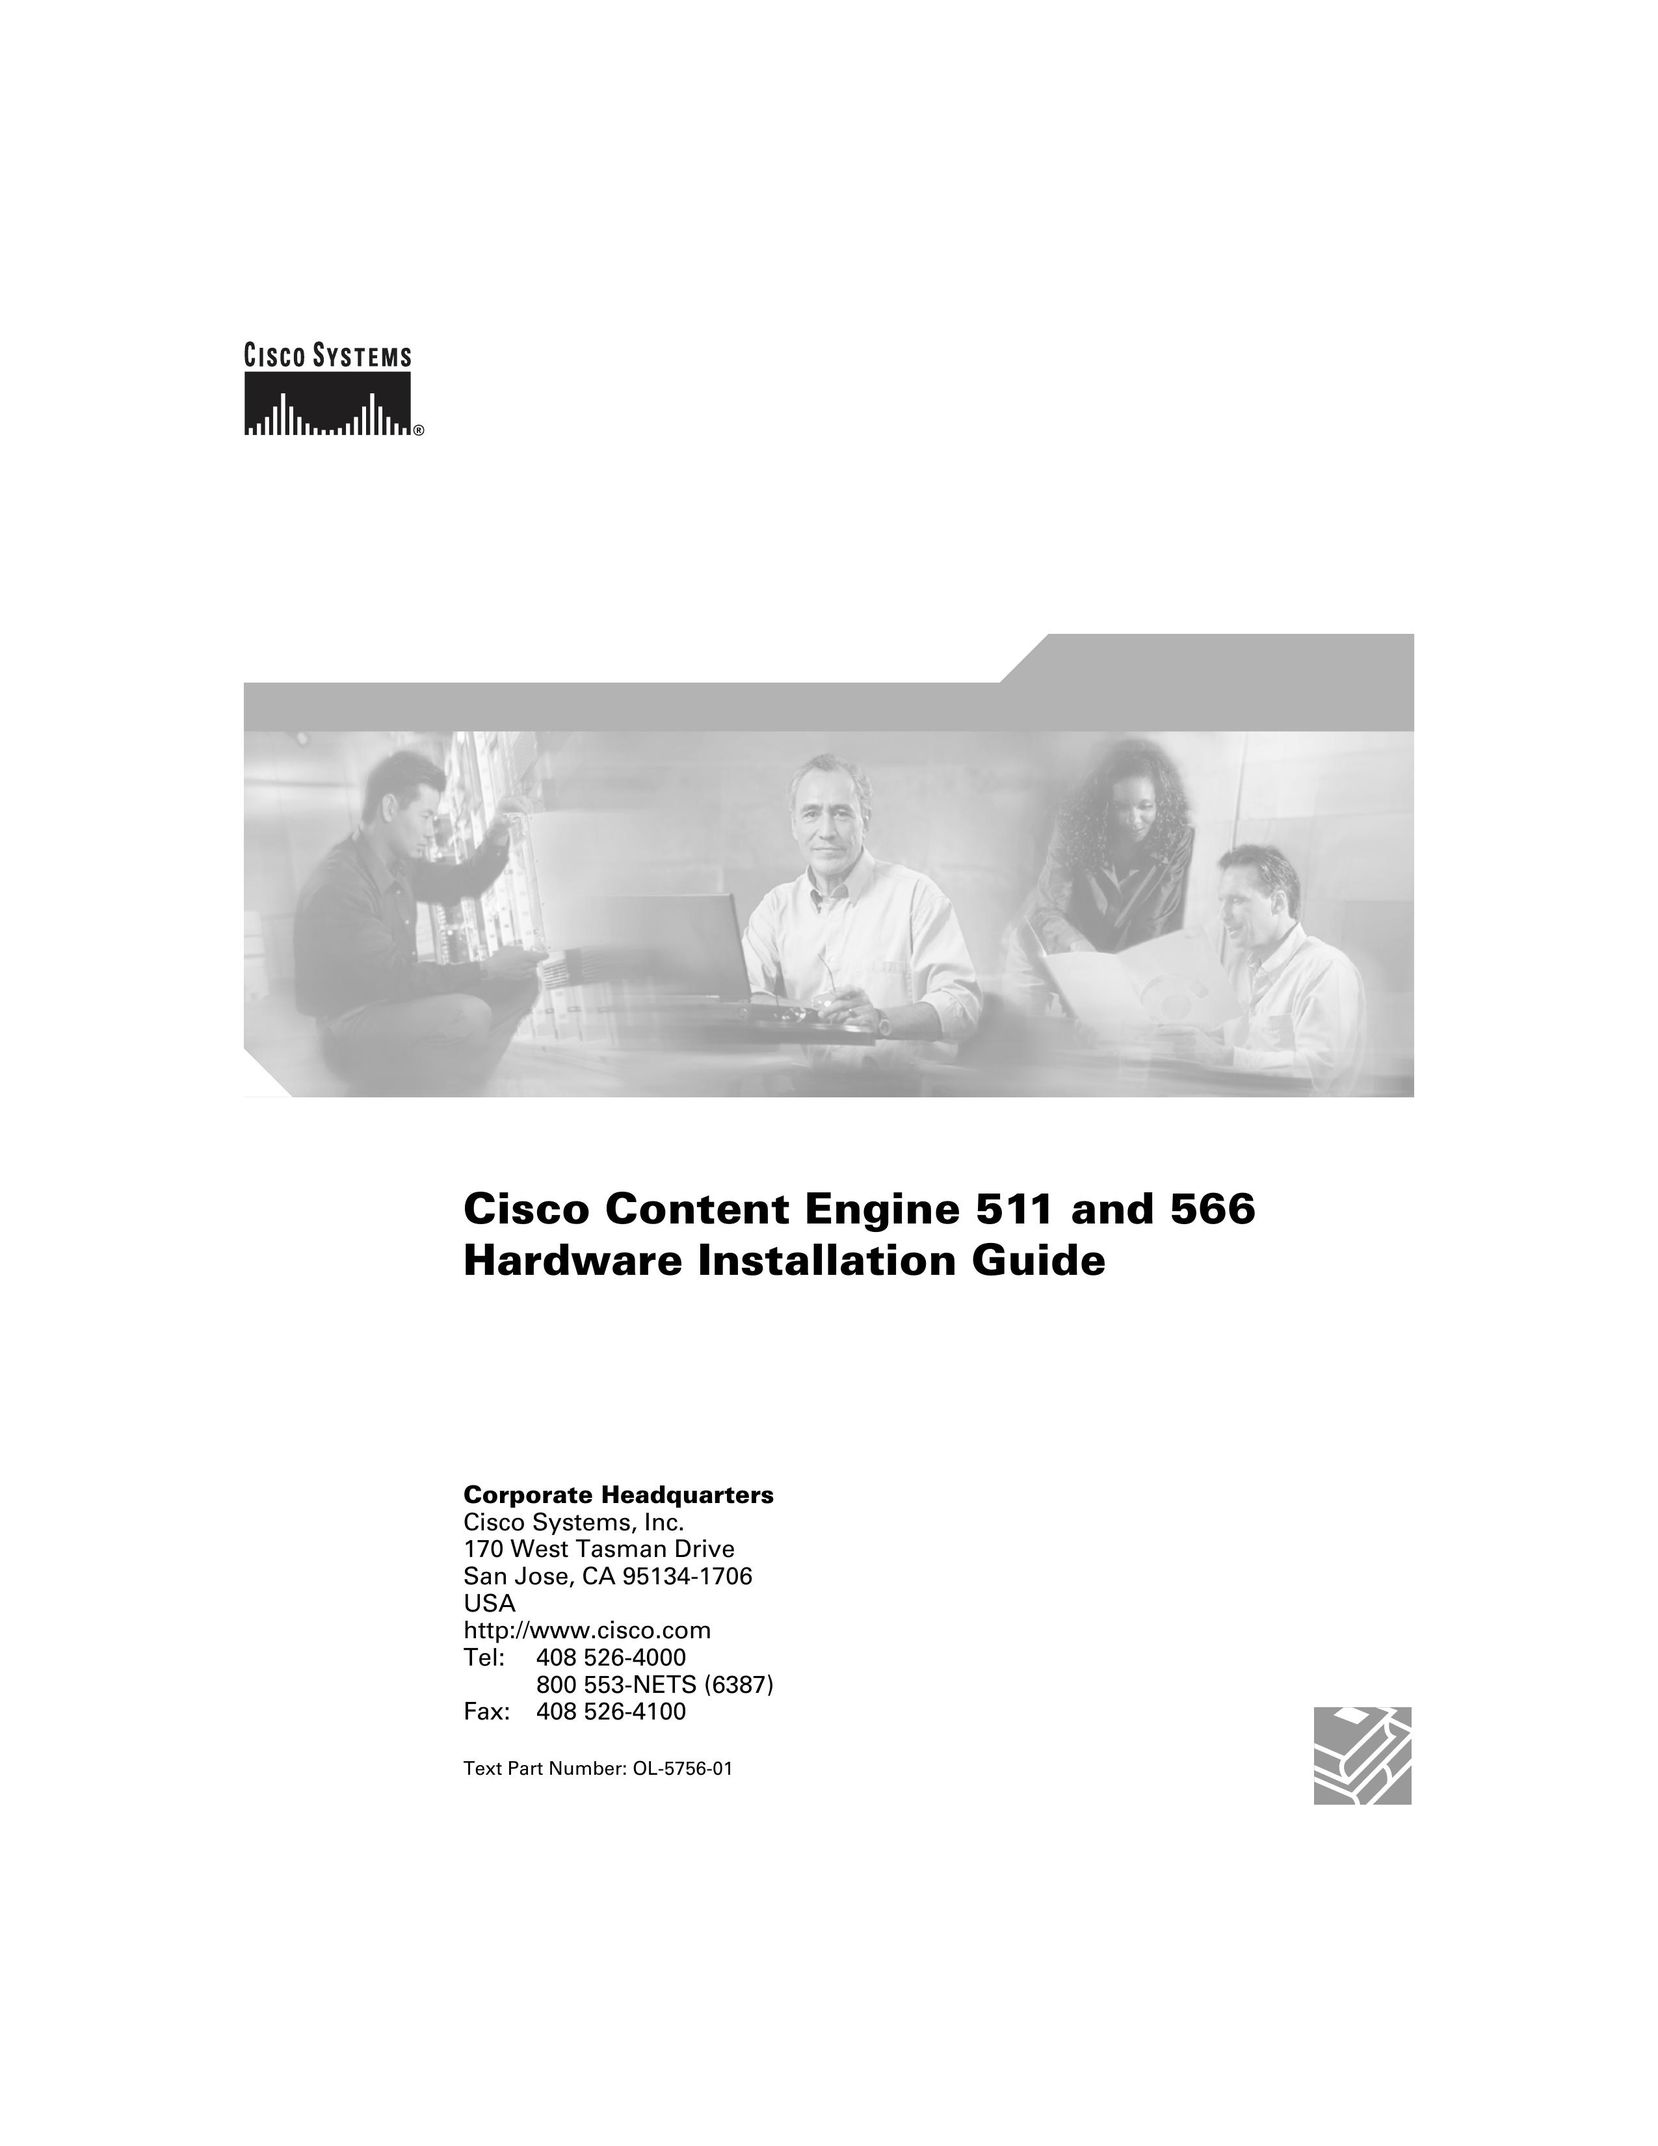 Cisco Systems 566 Network Hardware User Manual